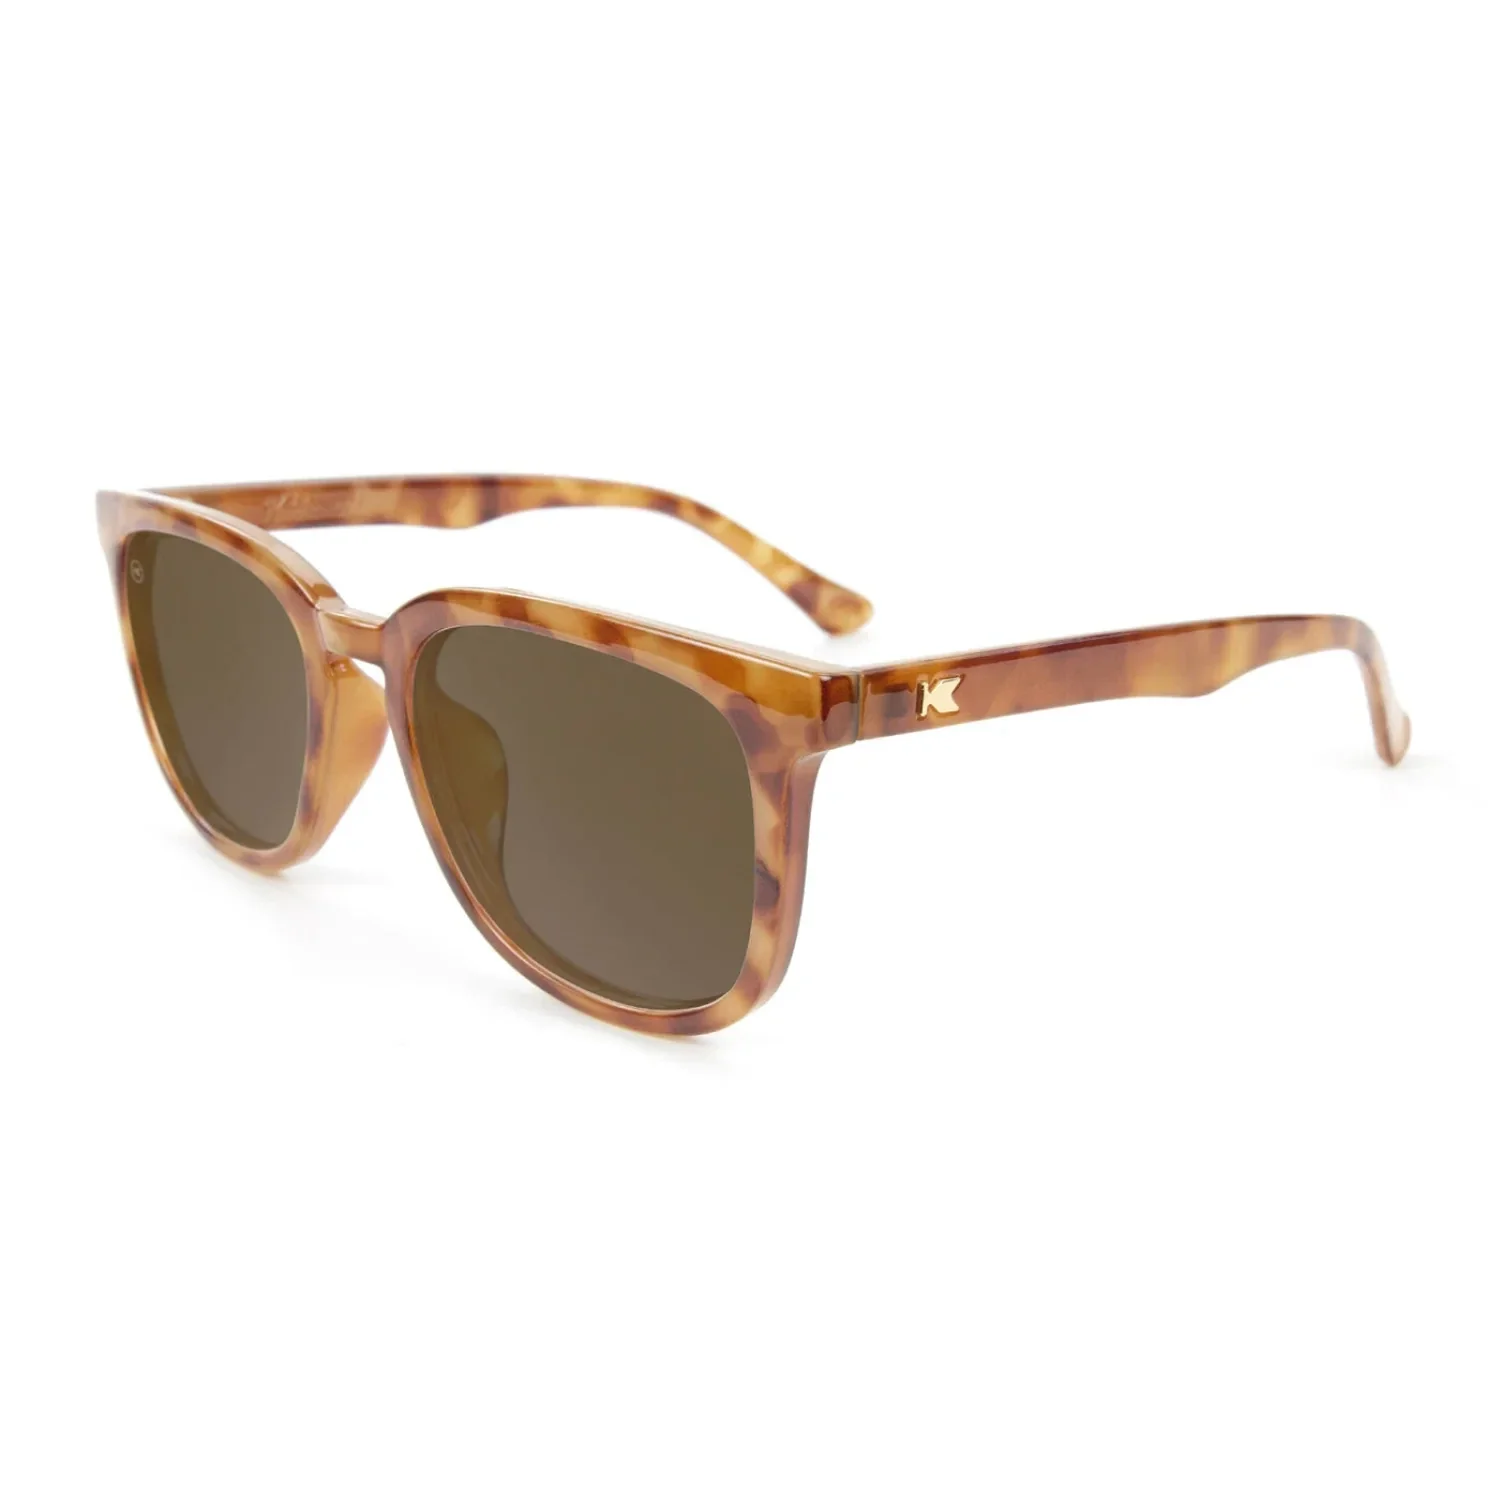 Knockaround 21. GENERAL ACCESS - SUNGLASS Paso Robles GLOSSY BLONDE TORTOISE SHELL | AMBER